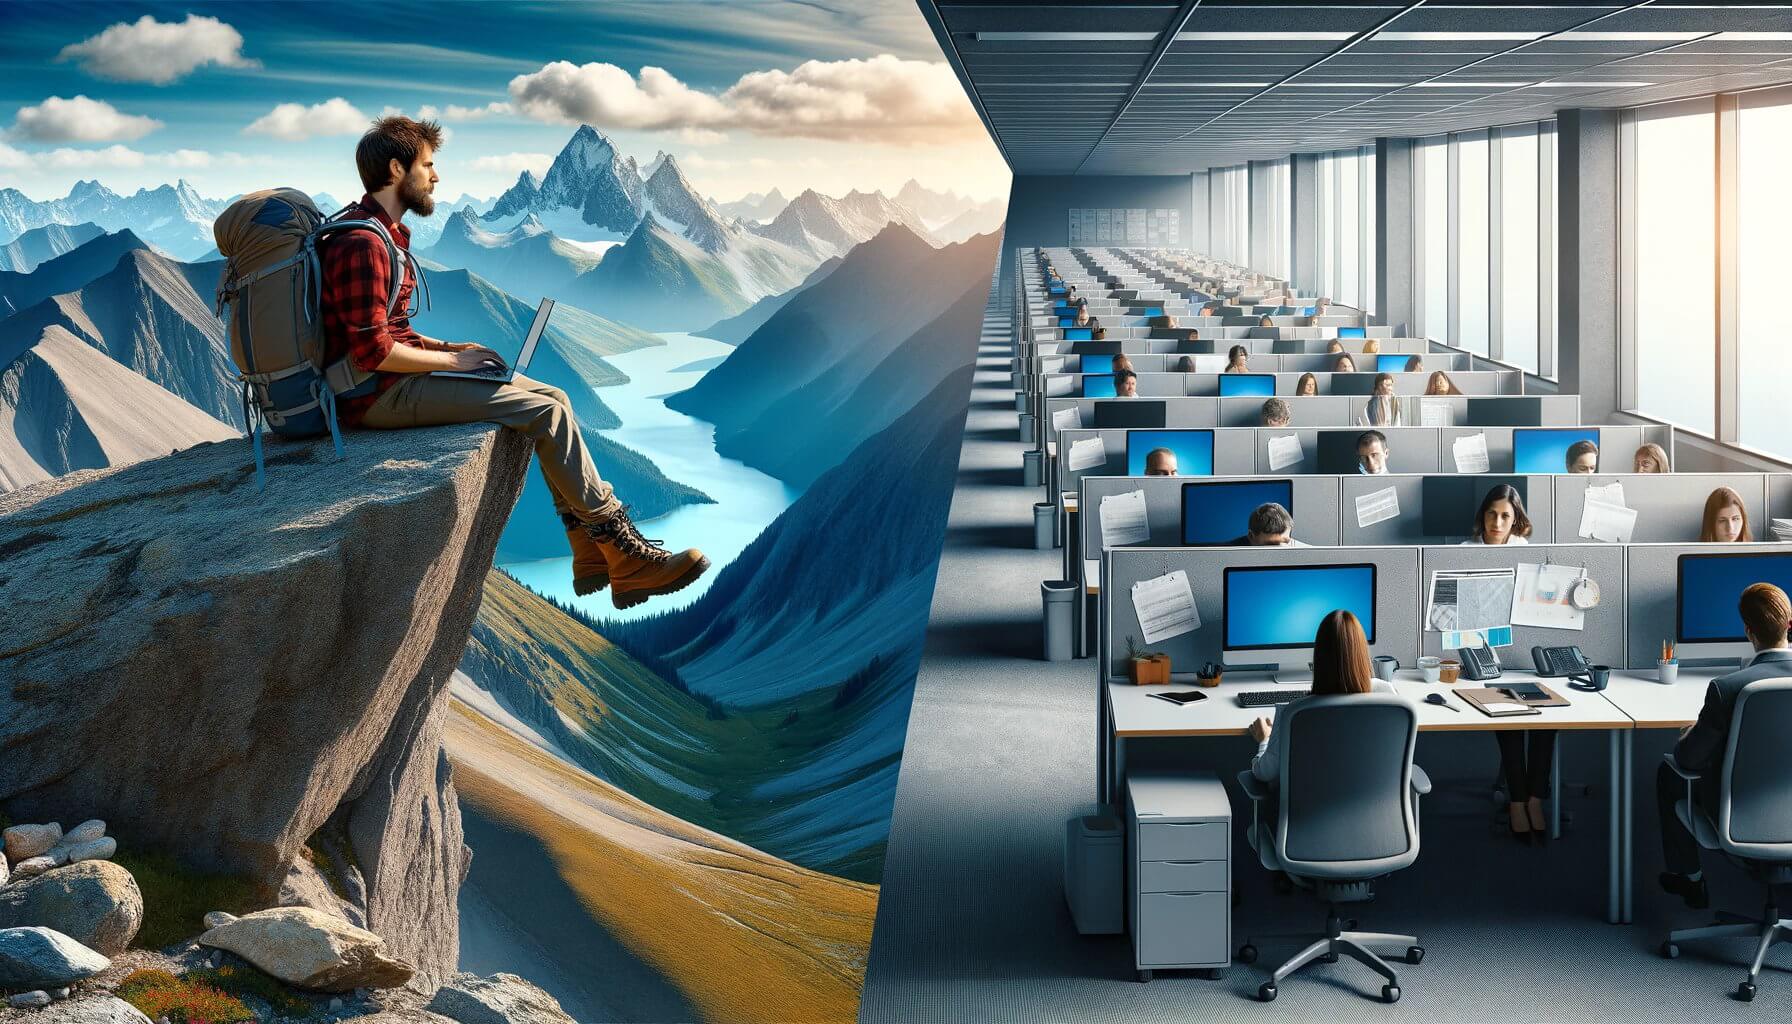 On the left, a remote entrepreneur sits on a mountain's edge with a laptop, surrounded by breathtaking landscape. On the right, a typical cubicle work environment